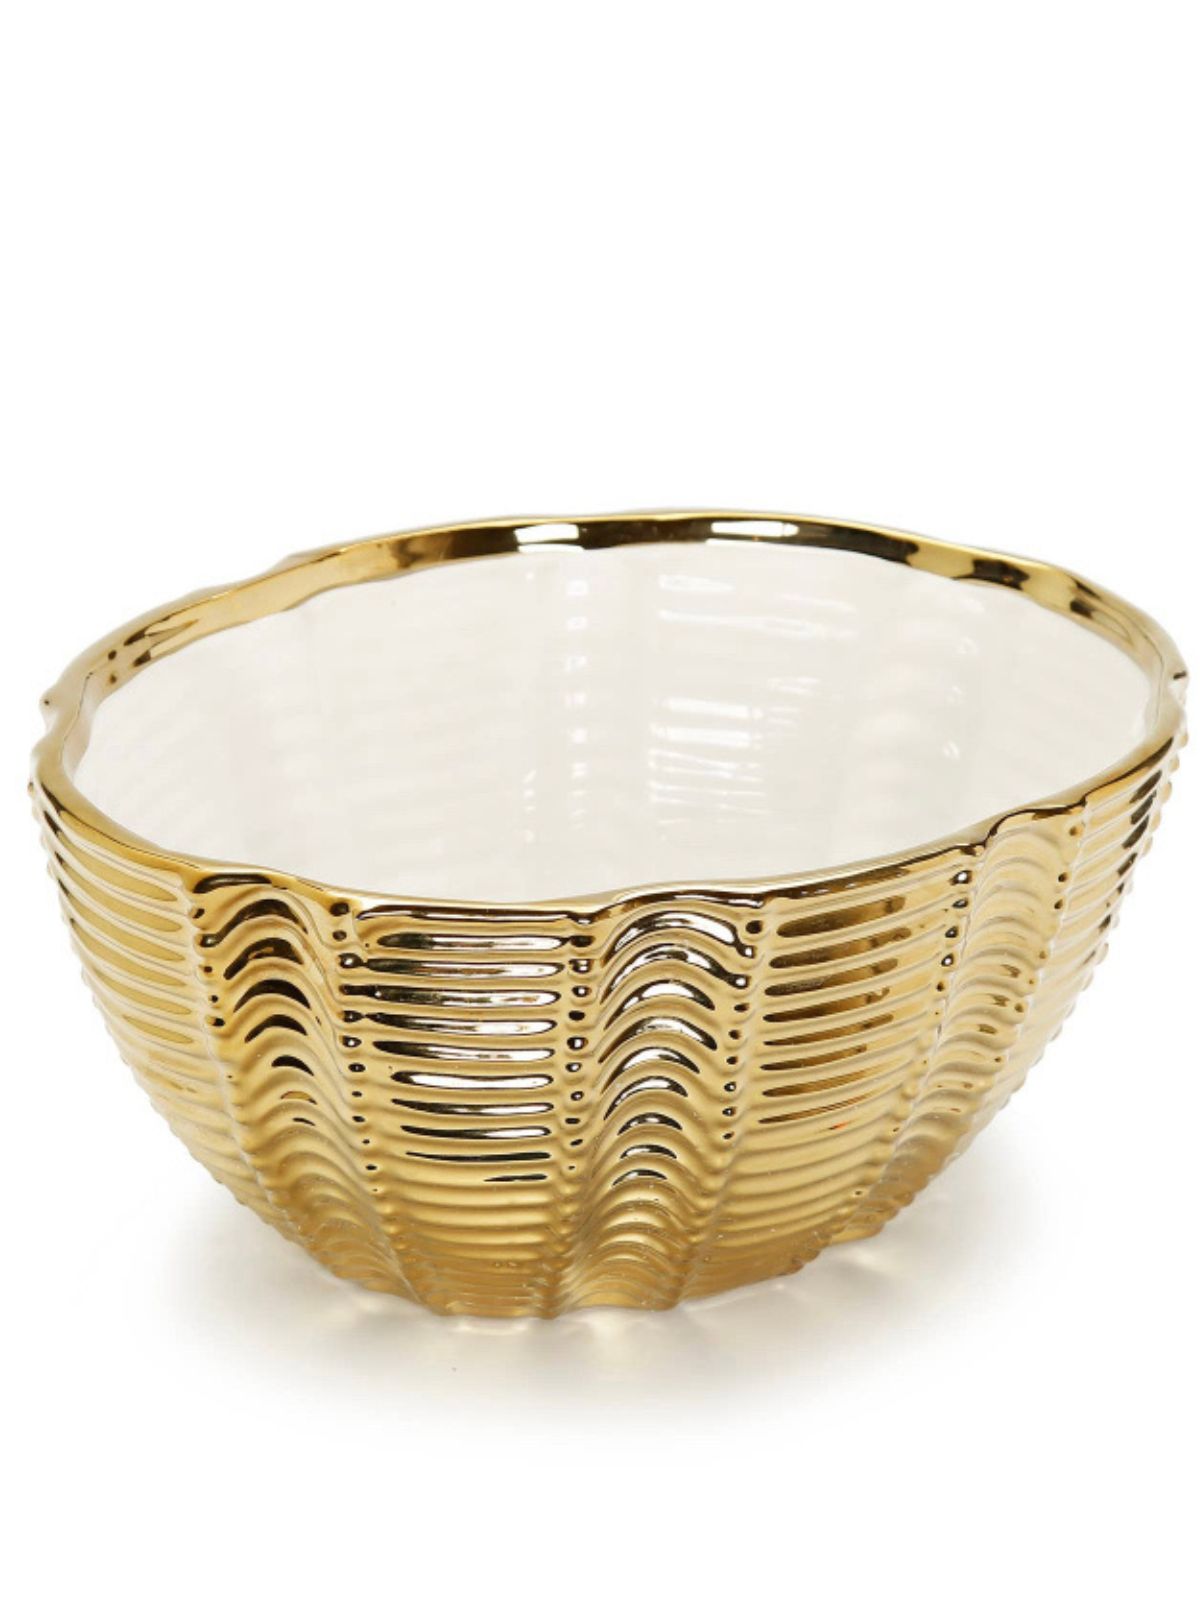 This textured gold bowl comes with a white interior to add in your favorite fillers. This would make a perfect centerpiece for your dining table or coffee table.  